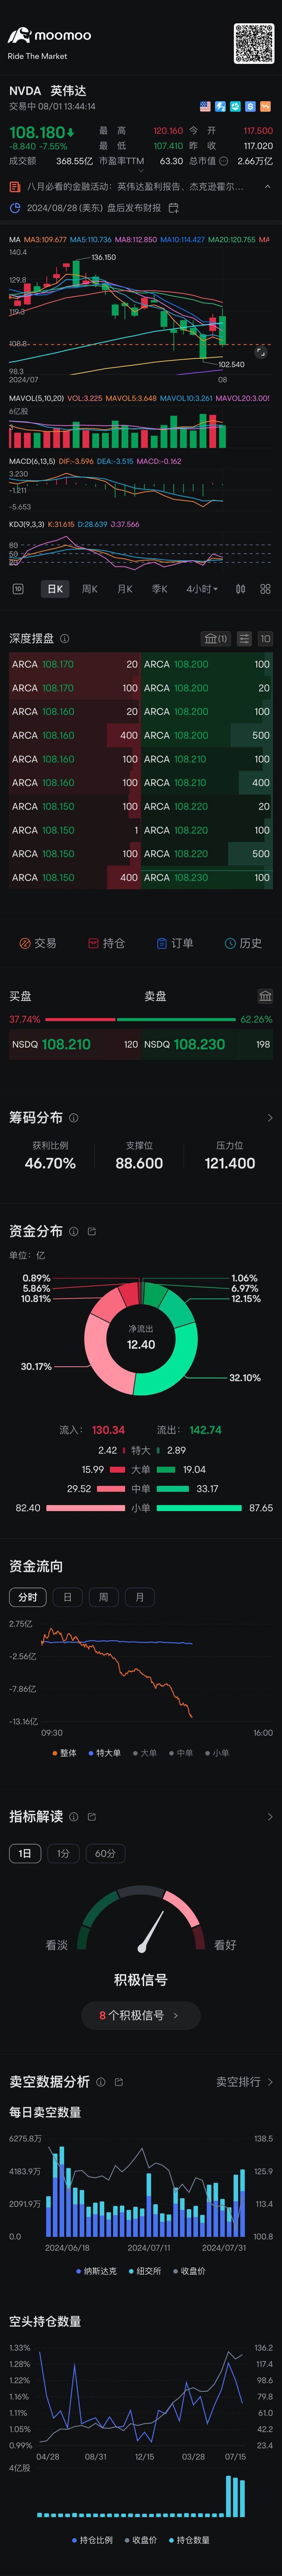 Retweet Huang Zhe Shunge's message: The stock market is recovering more than my budget today, but it is in line with the bottom shock. If Apple's performance is...